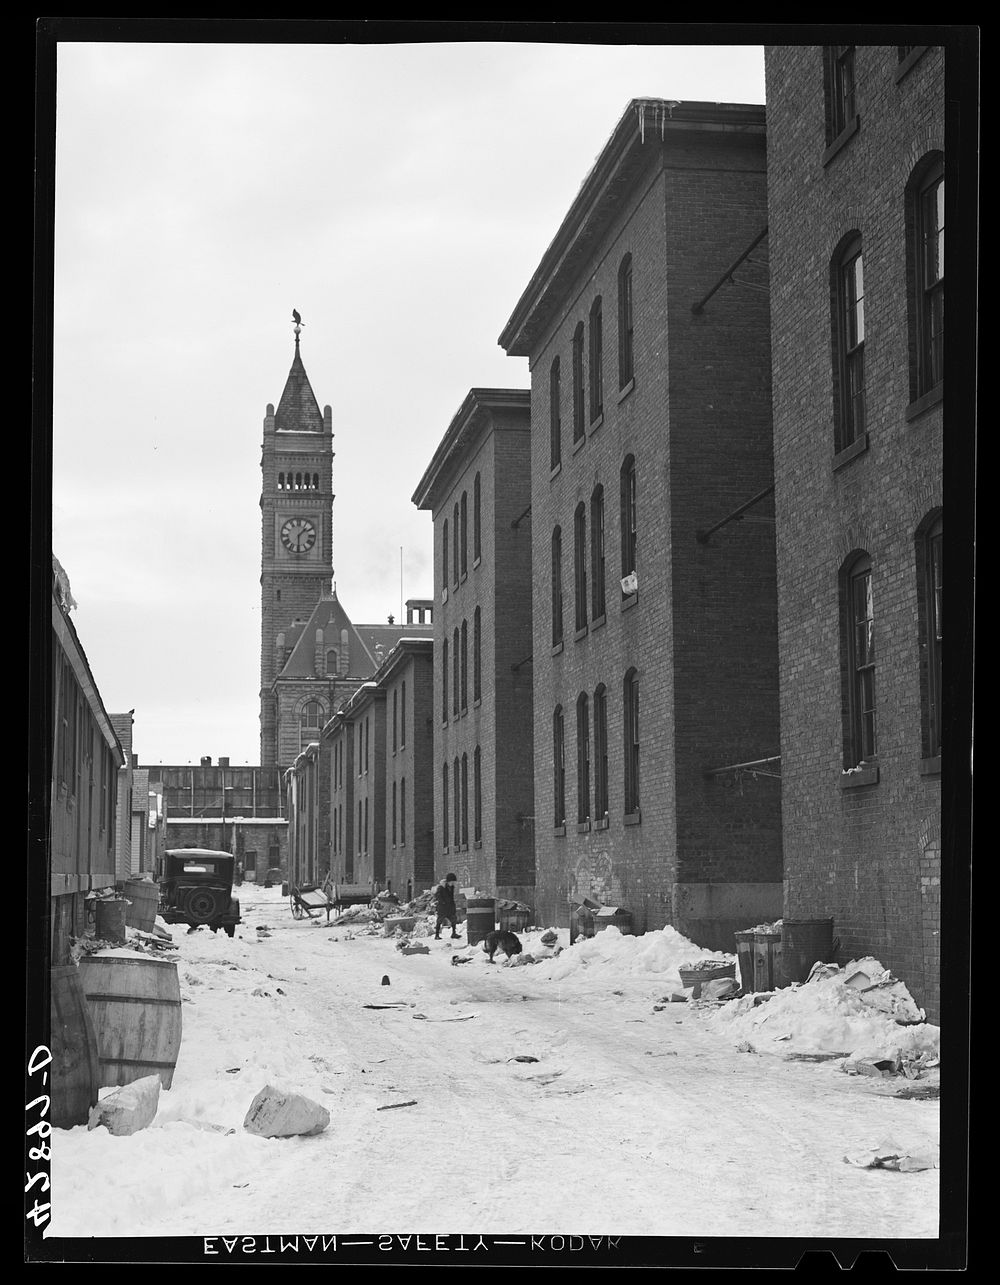 Row of workers' houses near the mills in Lowell, Massachusetts. Sourced from the Library of Congress.